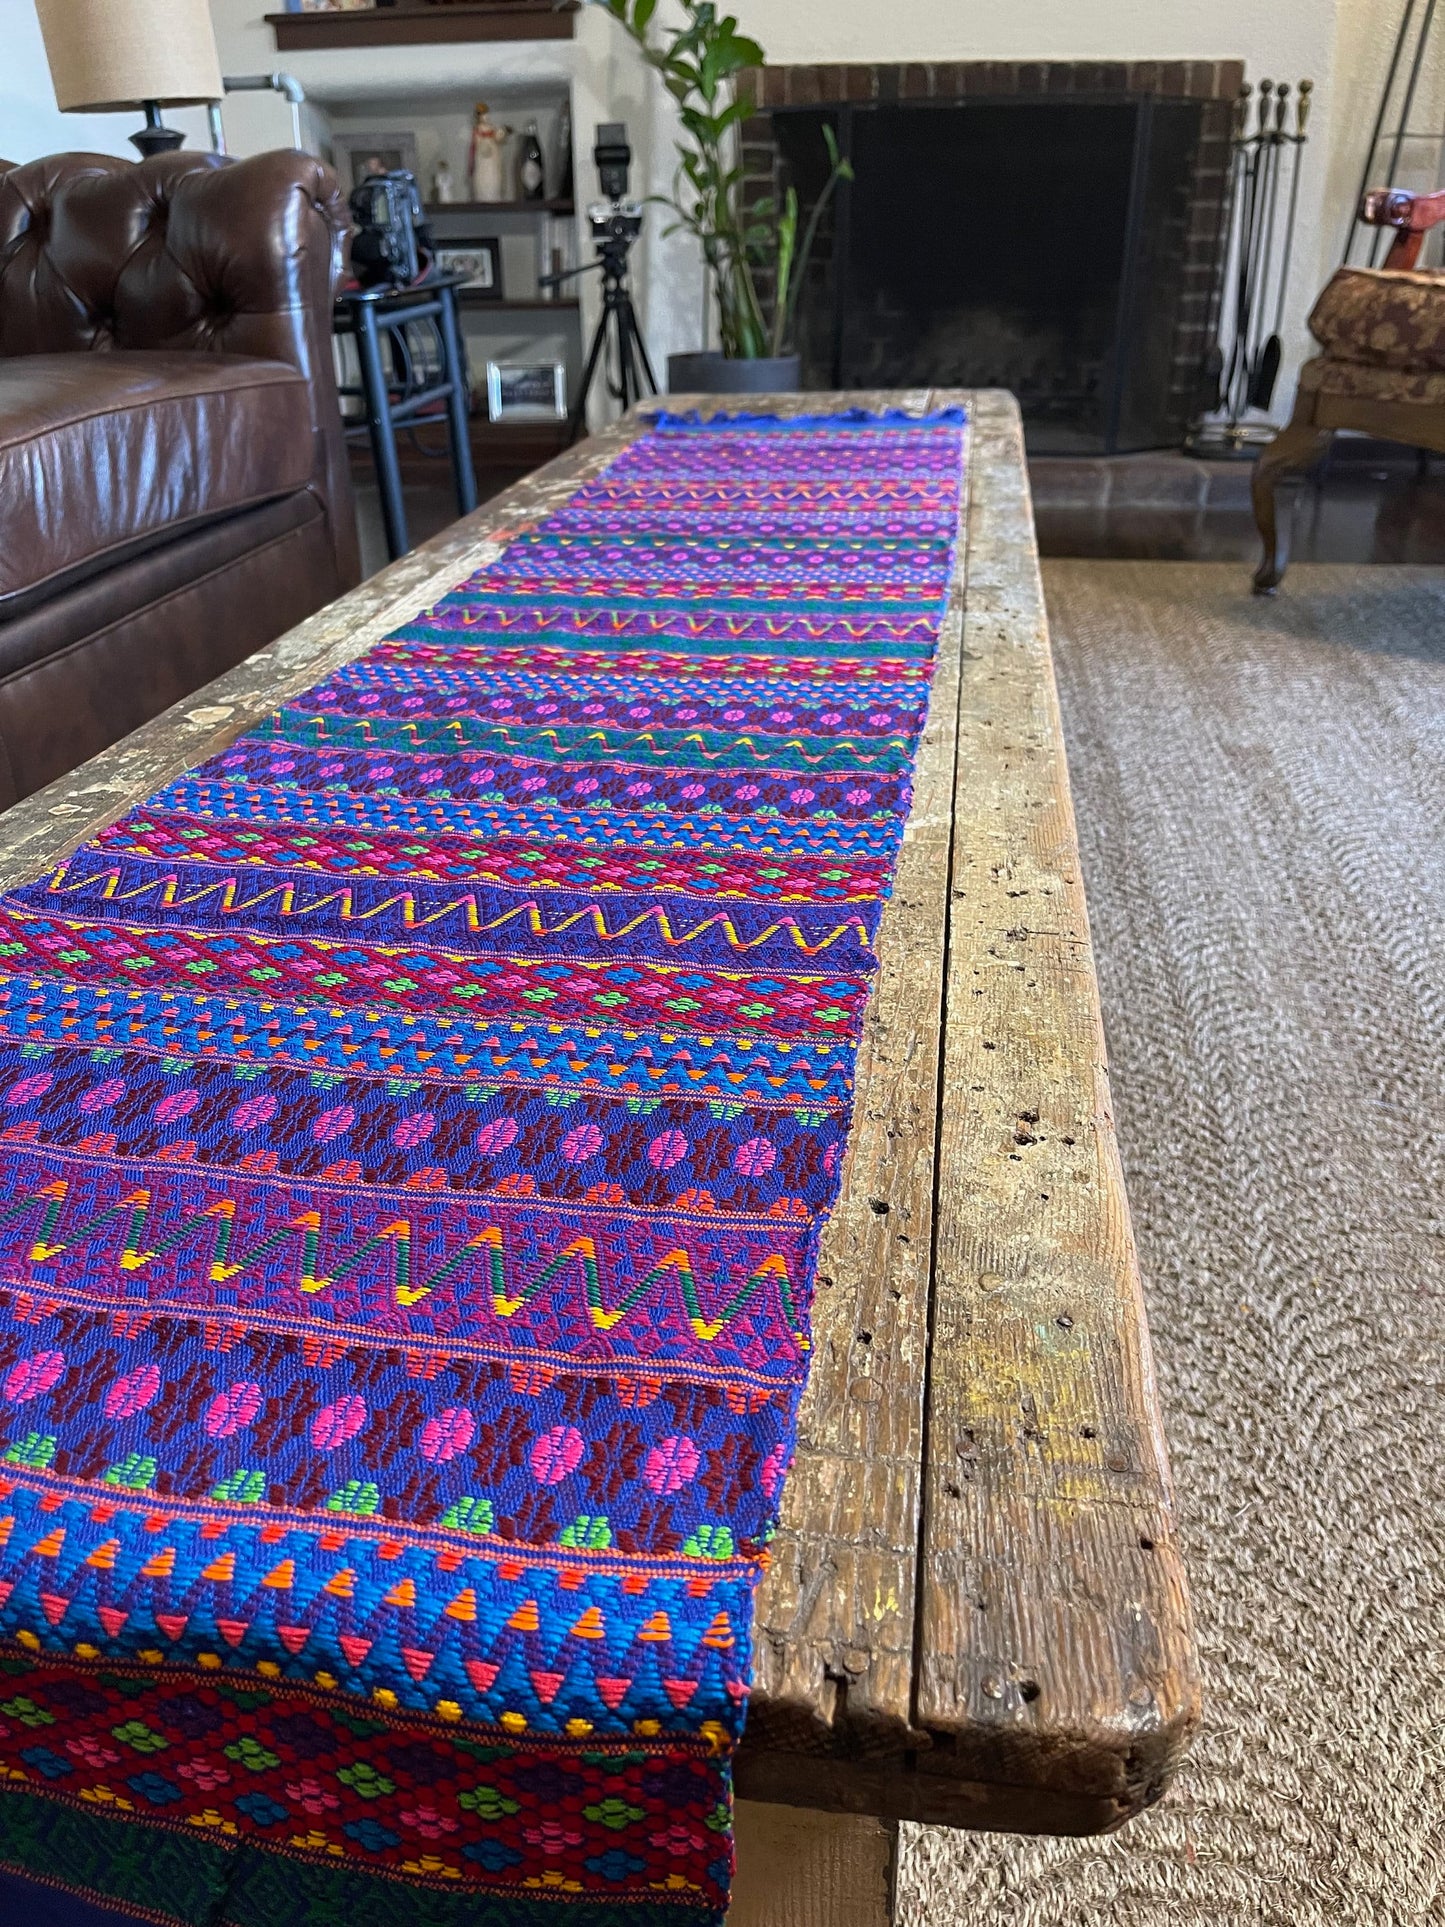 Guatemalan Handwoven Table Runners- Blues